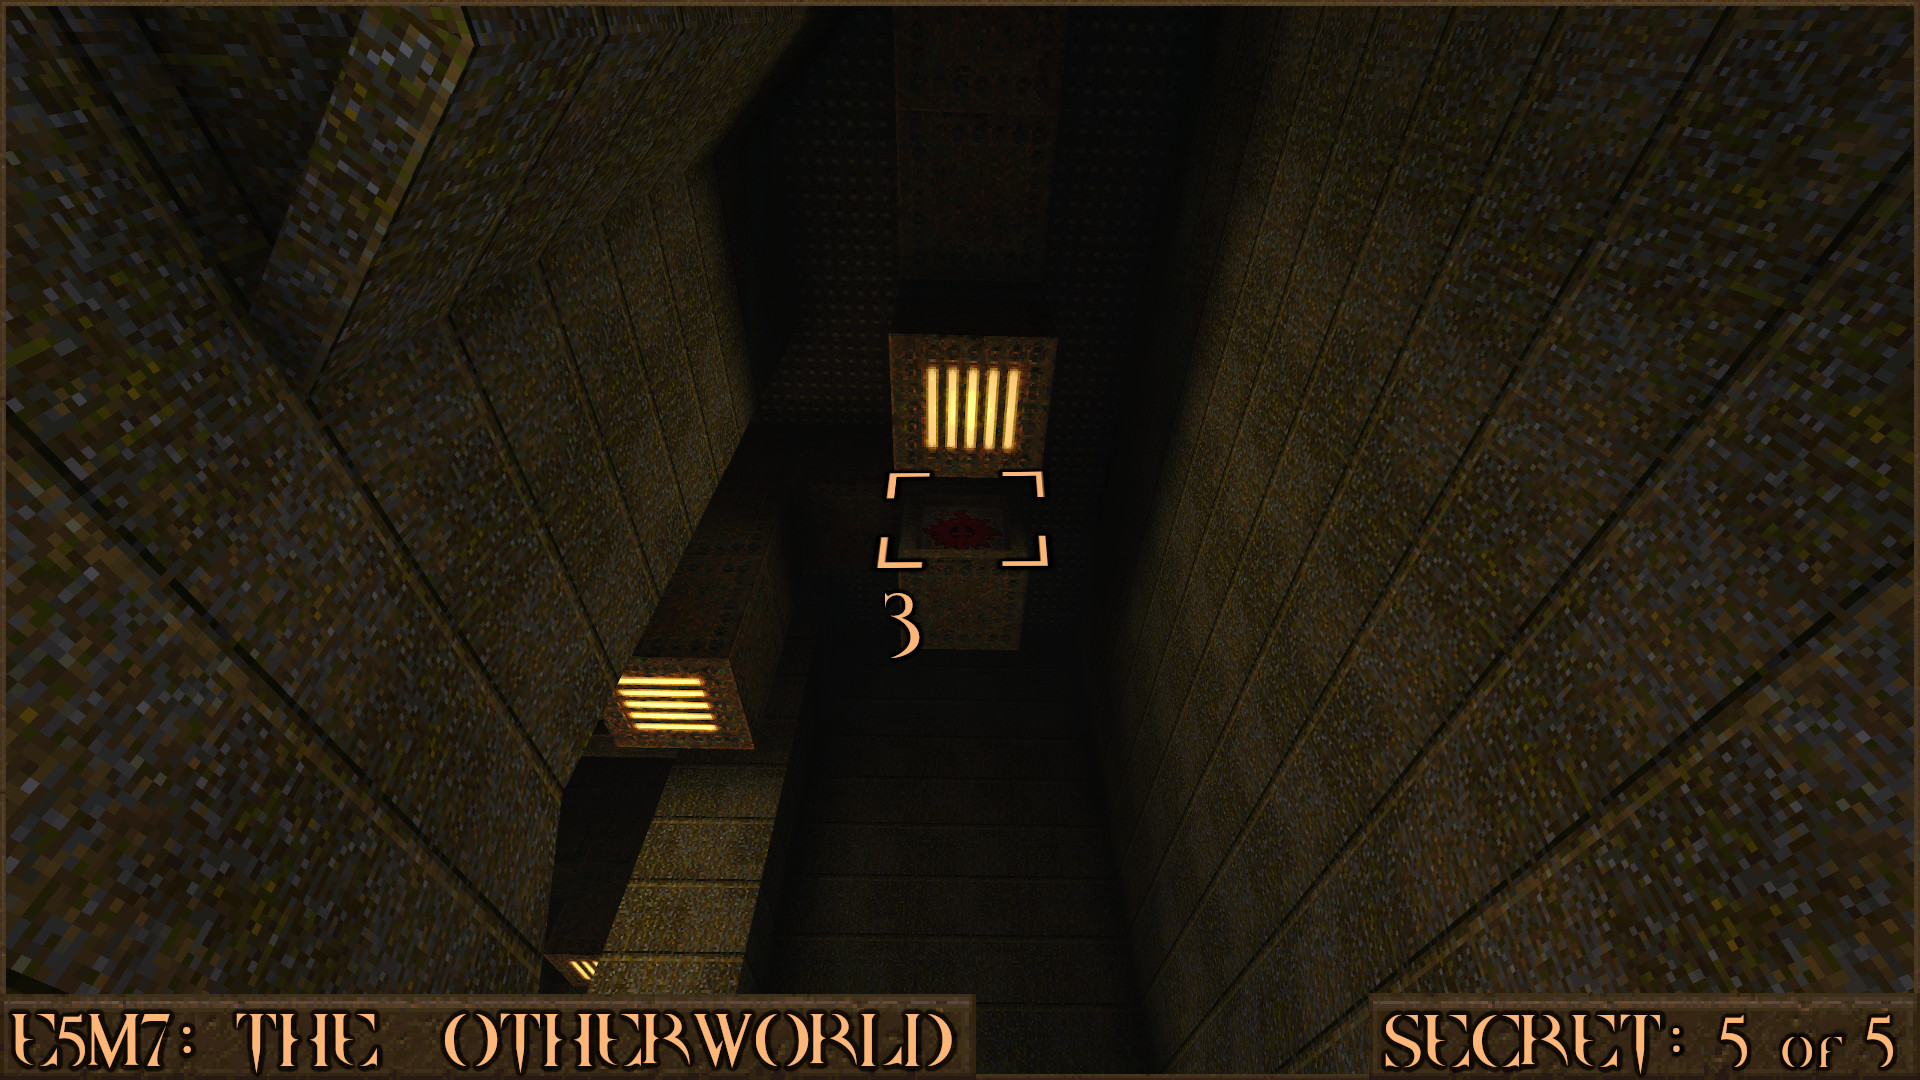 Quake Finding All Secrets in Quake Expansion pack: Dimension of the Past - E5M7: The Otherworld - 17601C5